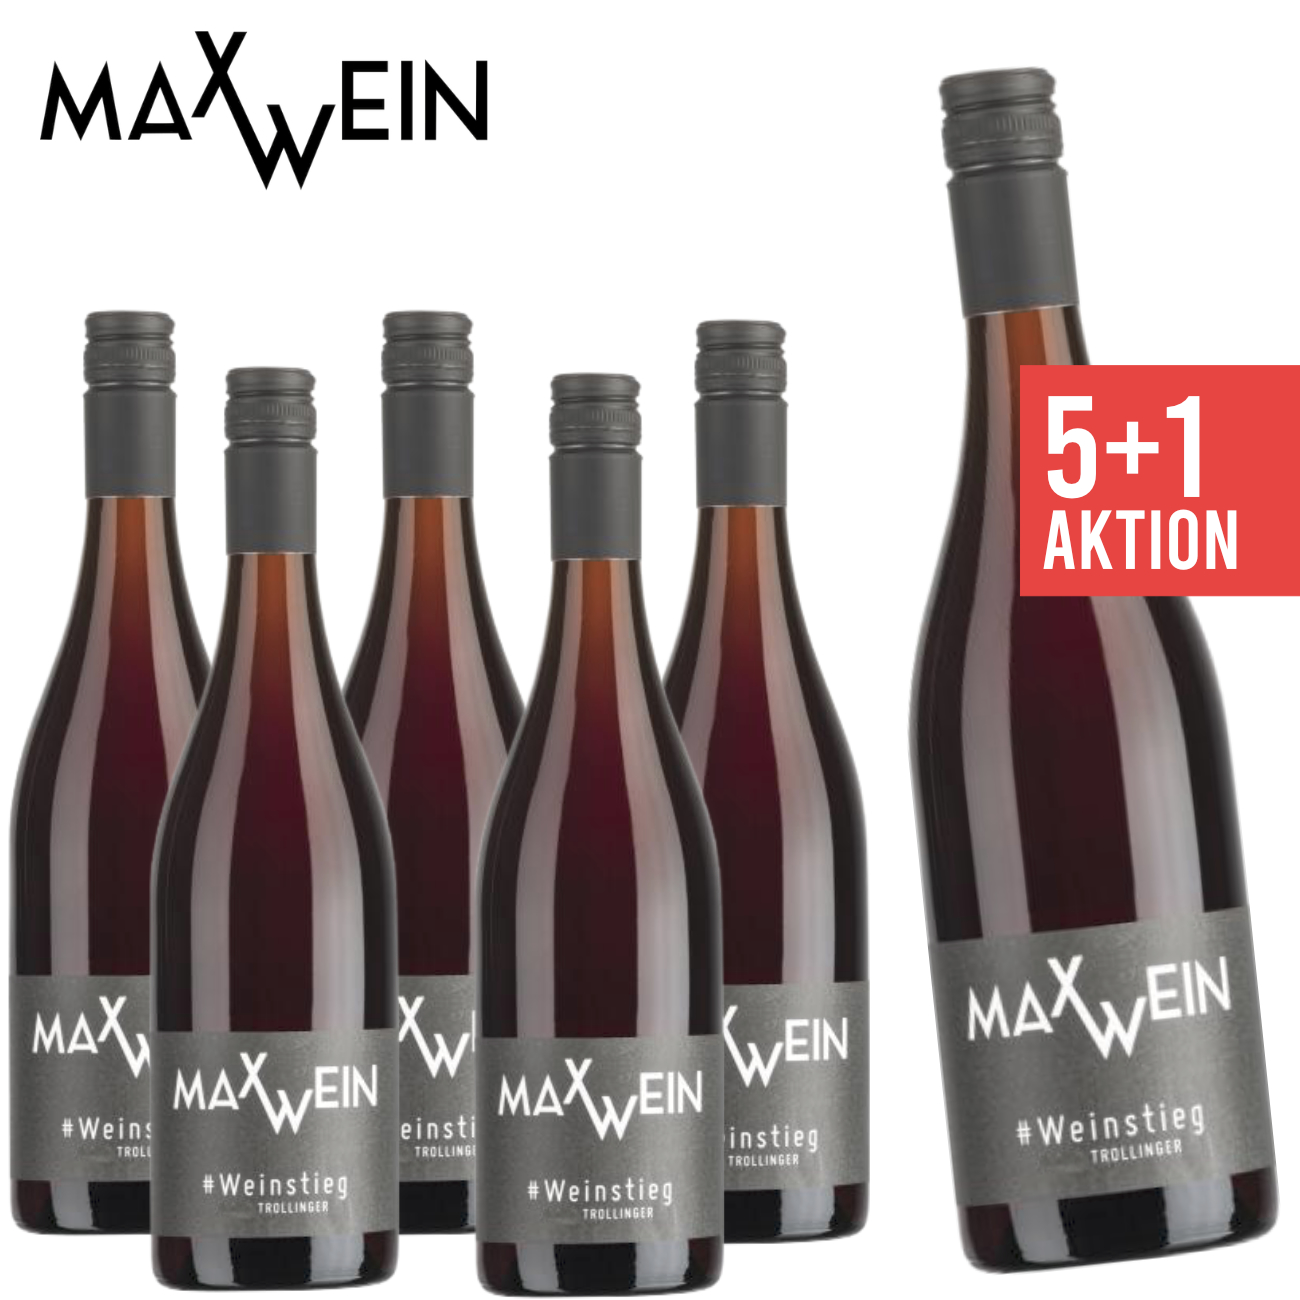 wein.plus find+buy: The wines of our members | wein.plus find+buy